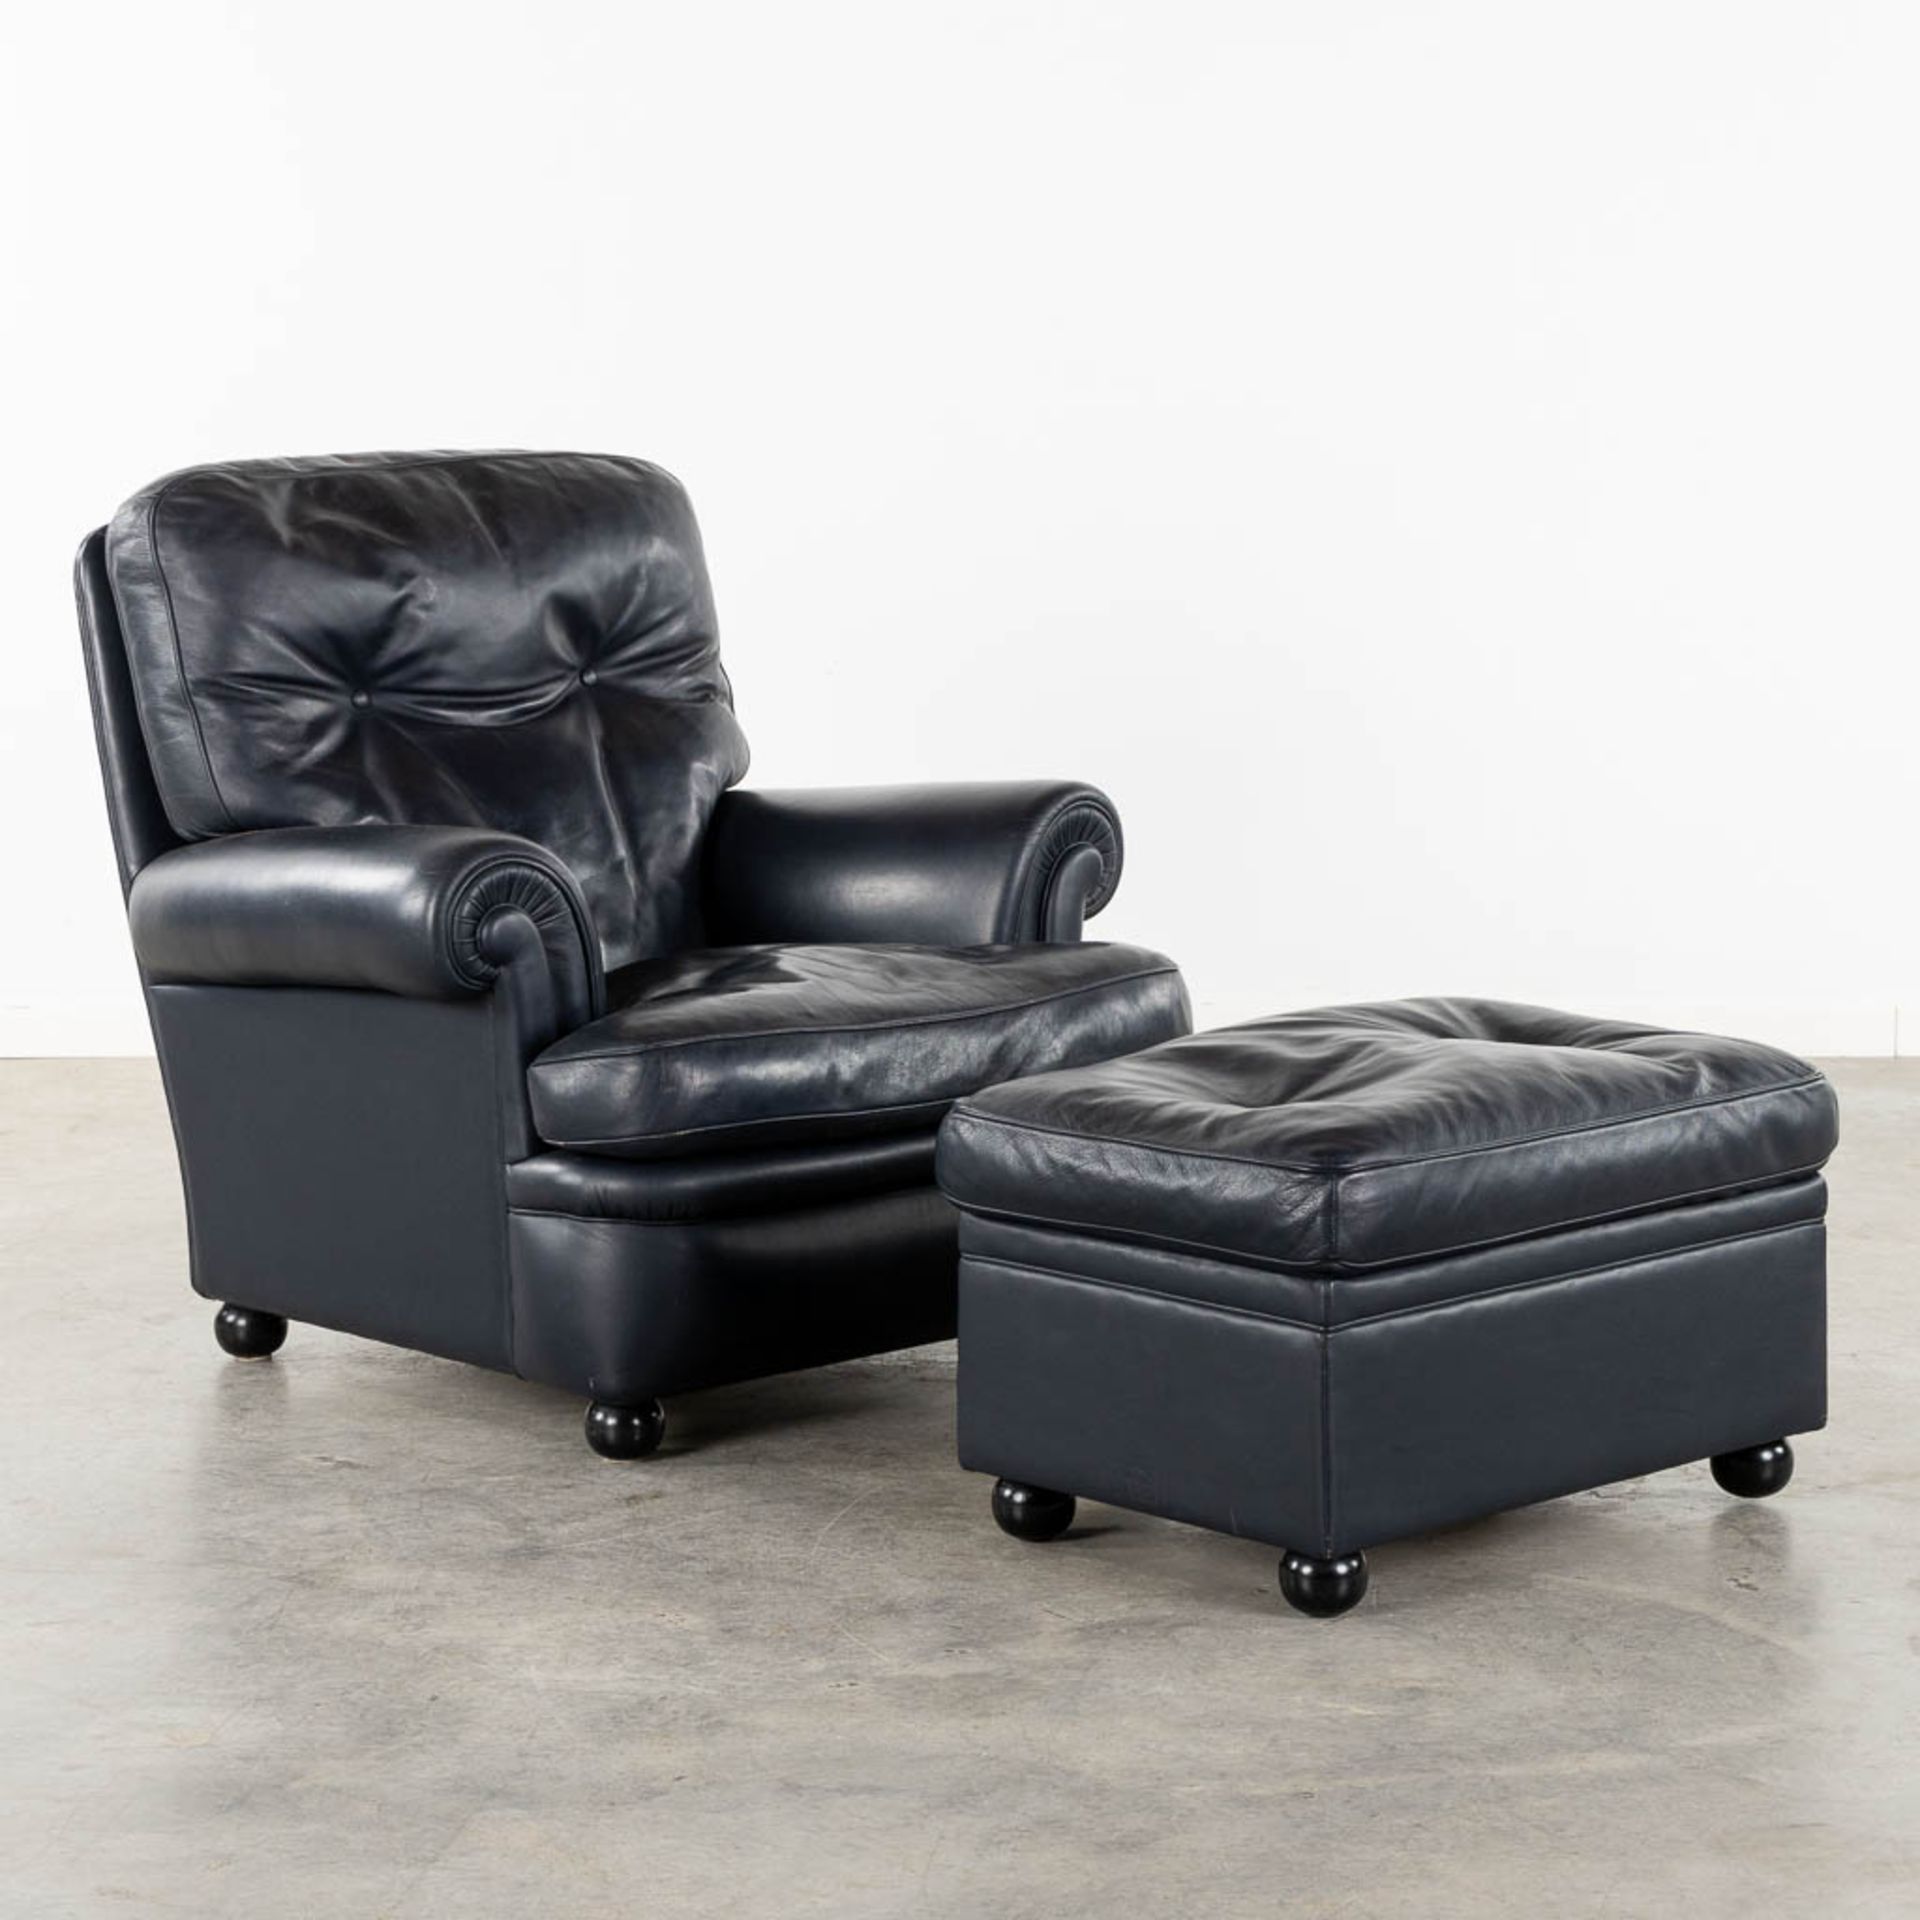 Poltrona Frau, a leather relaxing chair and matching ottoman. (L:90 x W:90 x H:88 cm)